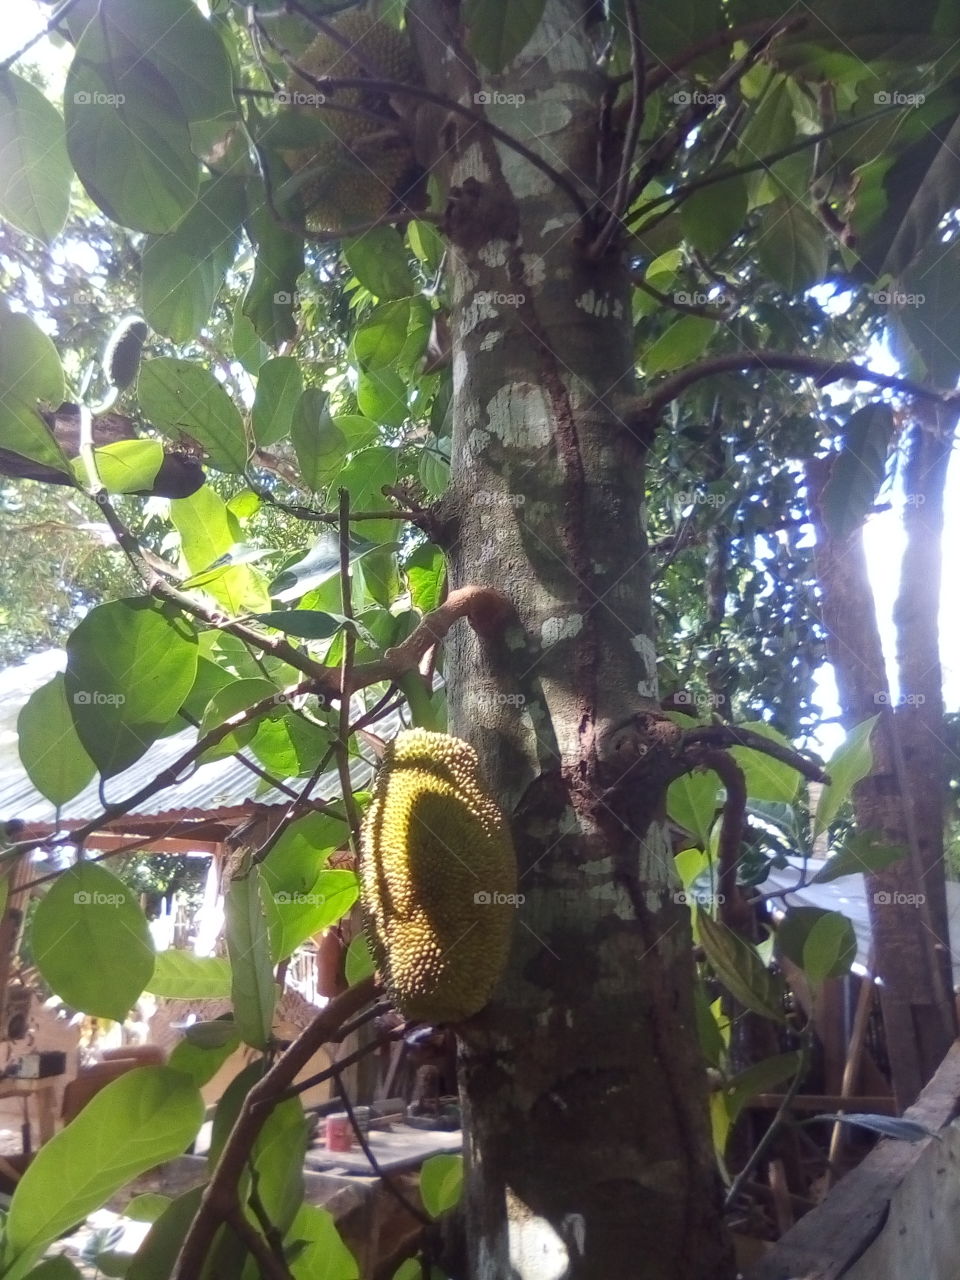 the junkfruit tree,good to be food and fruit.